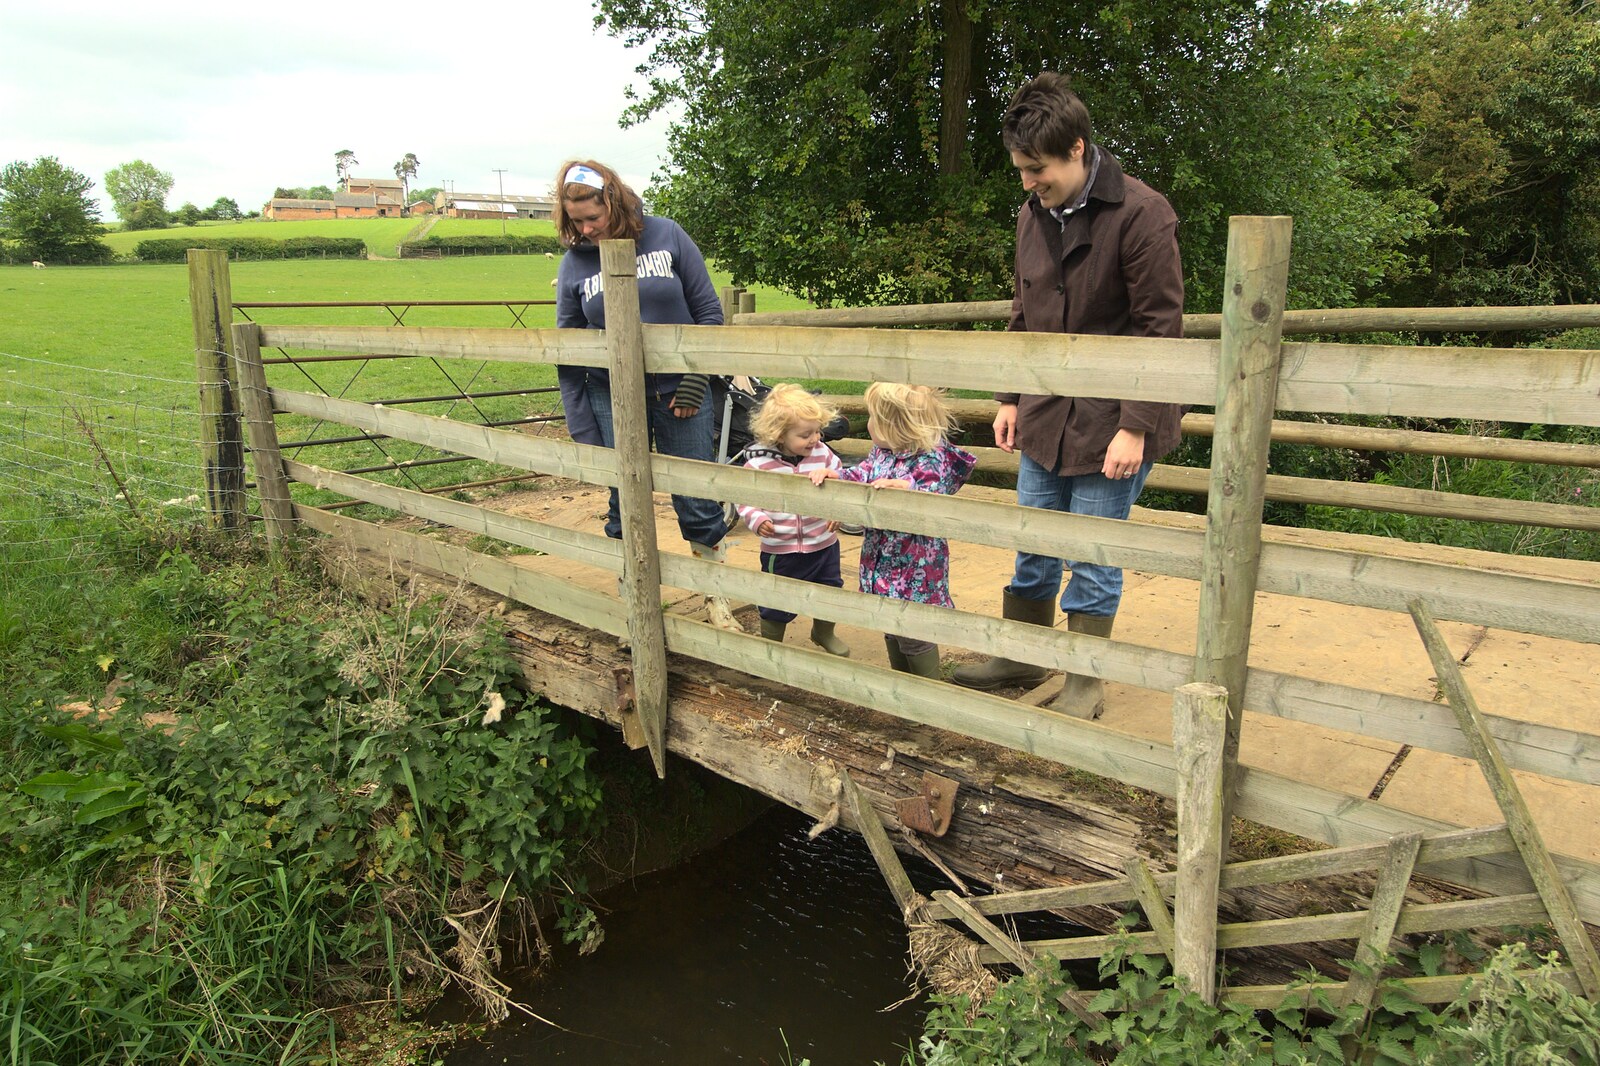 We play Pooh Sticks for a few moments from A Christening, Wilford, Northamptonshire - 22nd May 2011